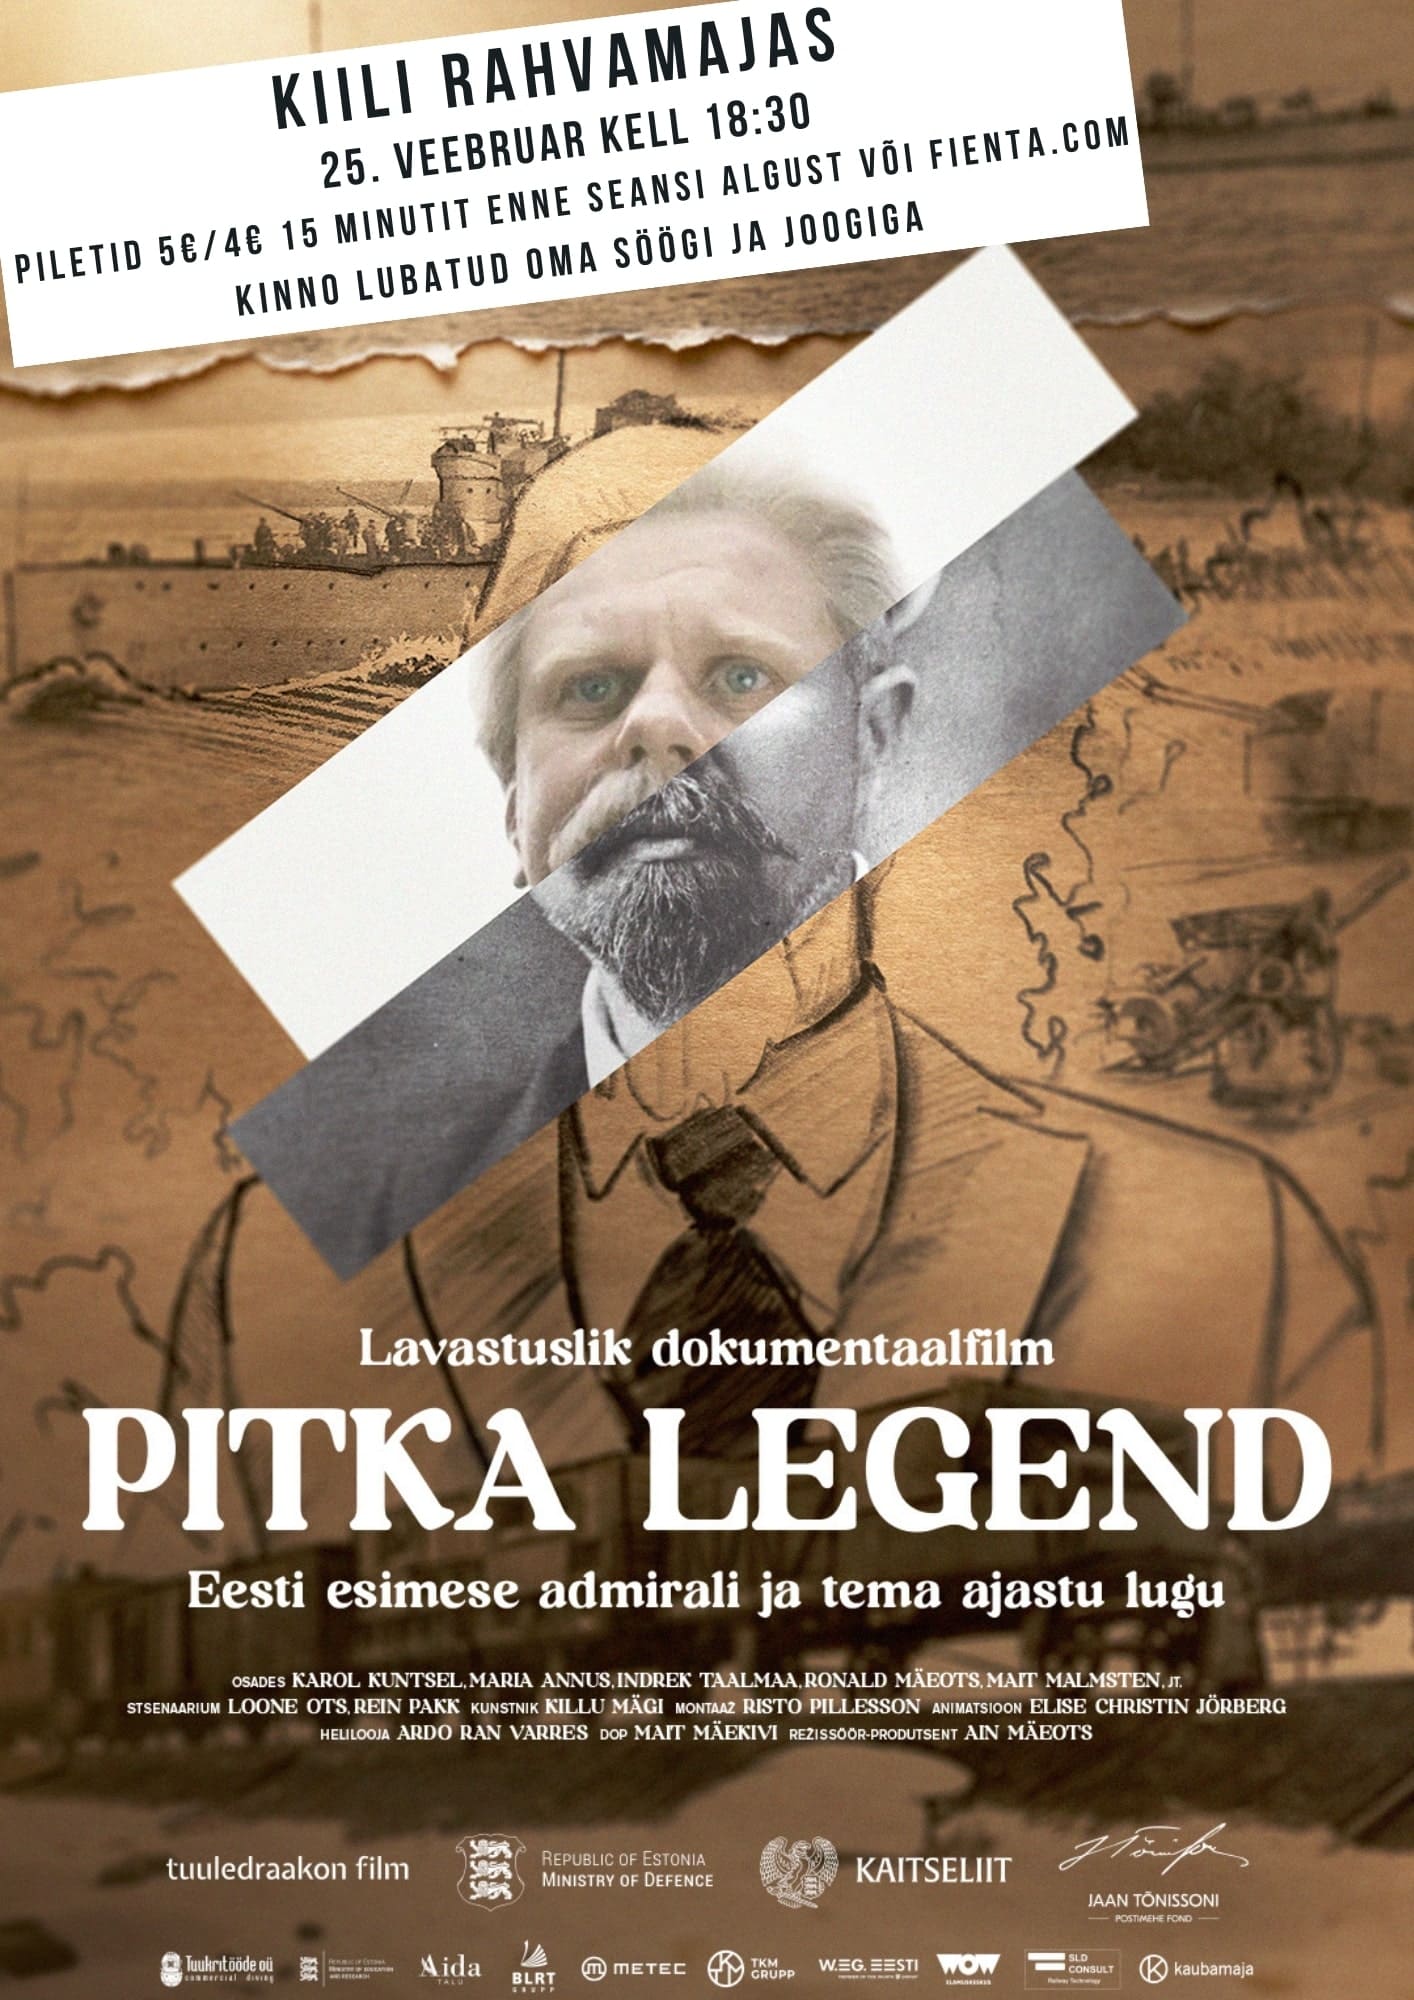 The legend of Pitka